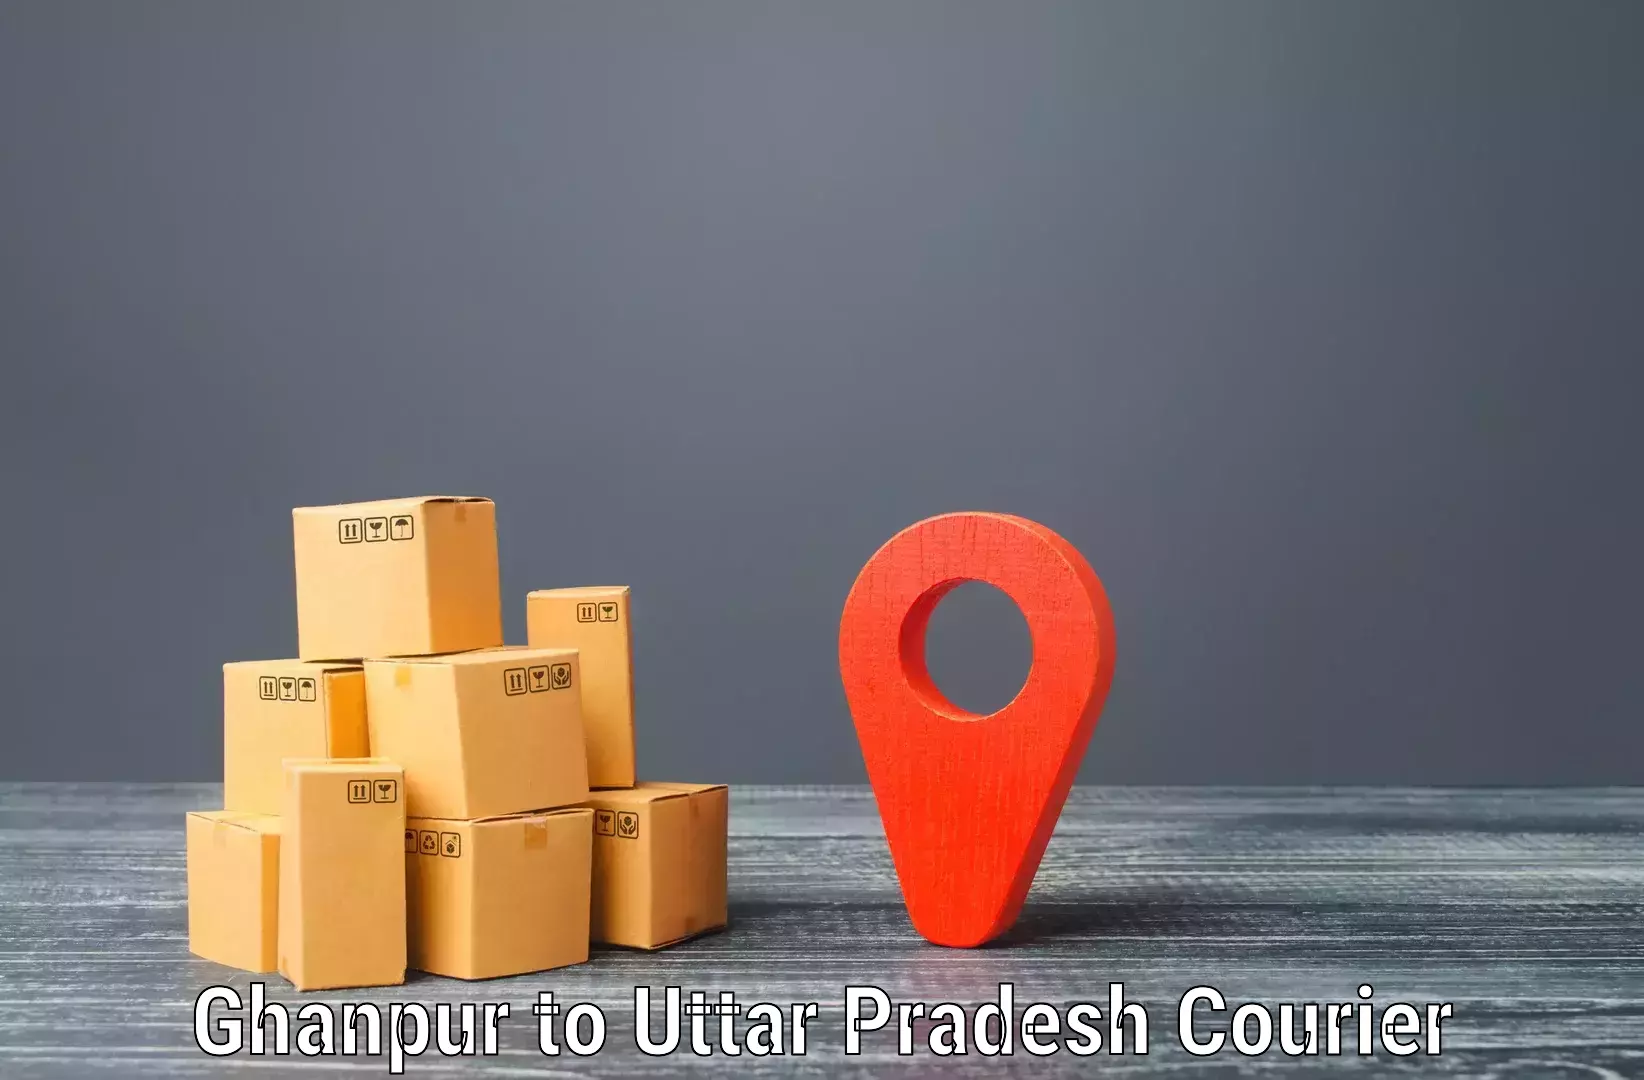 User-friendly delivery service Ghanpur to Etawah